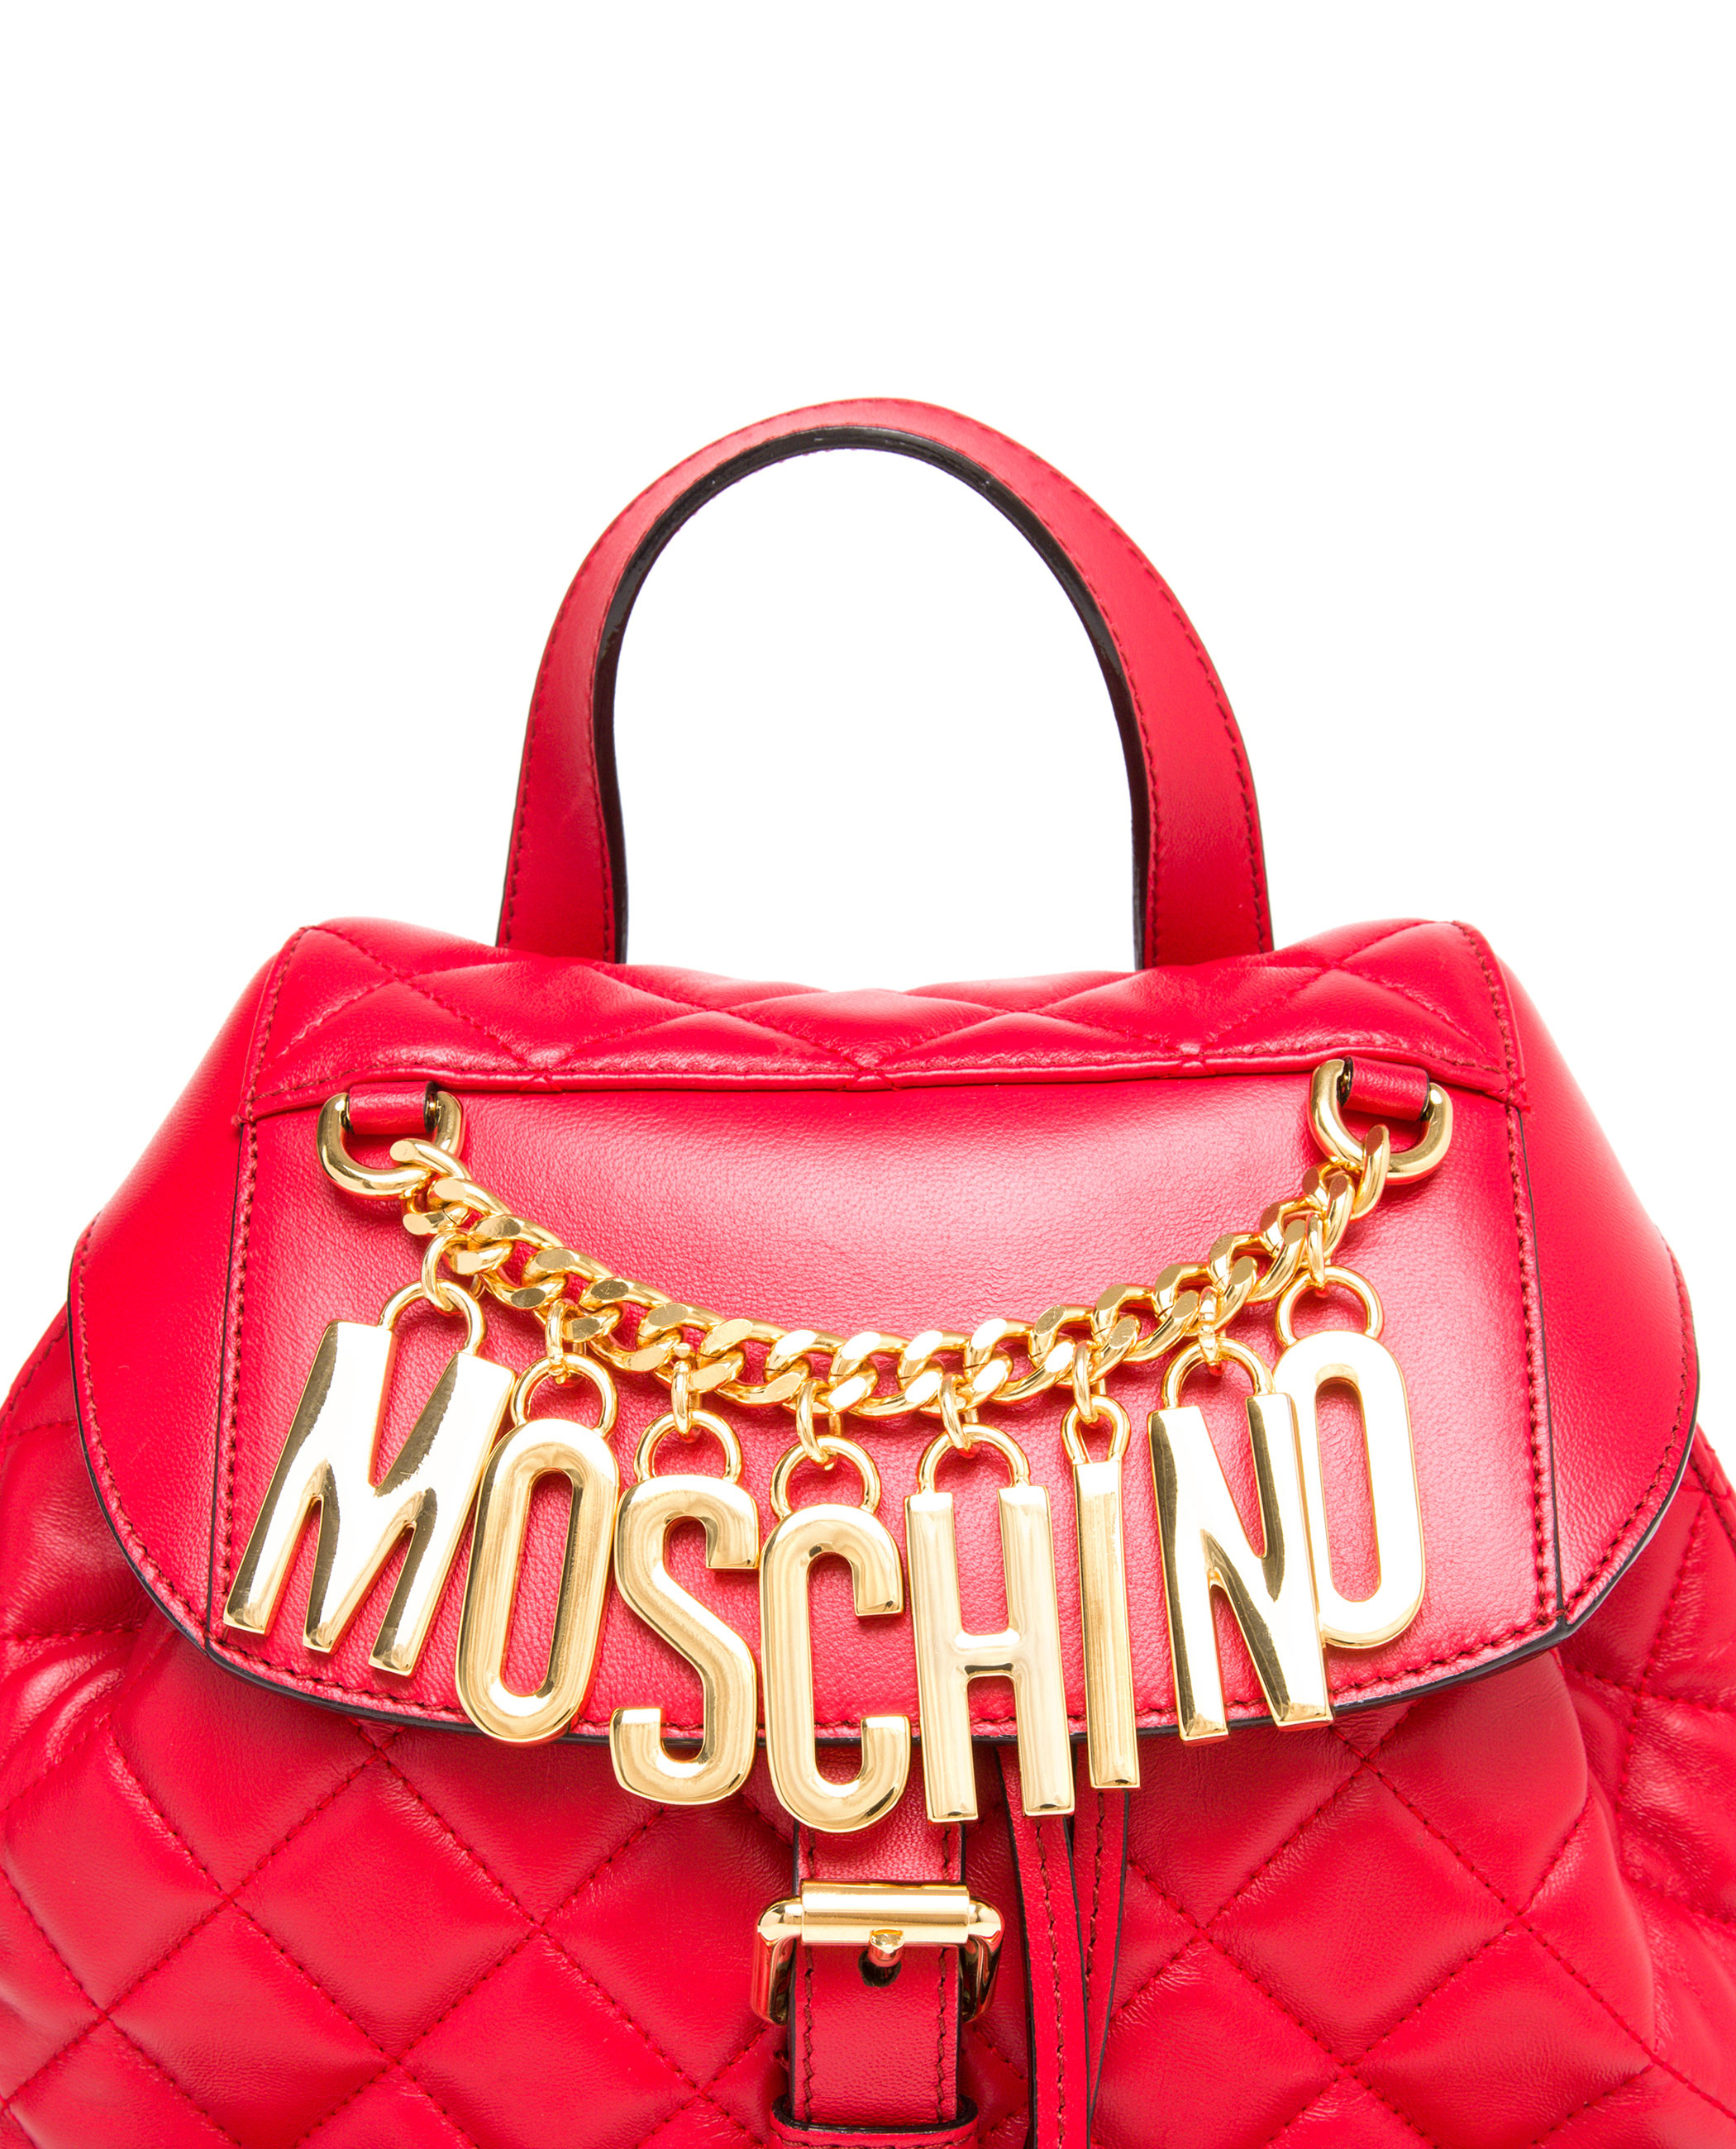 Lyst - Moschino Red Leather Backpack in Red